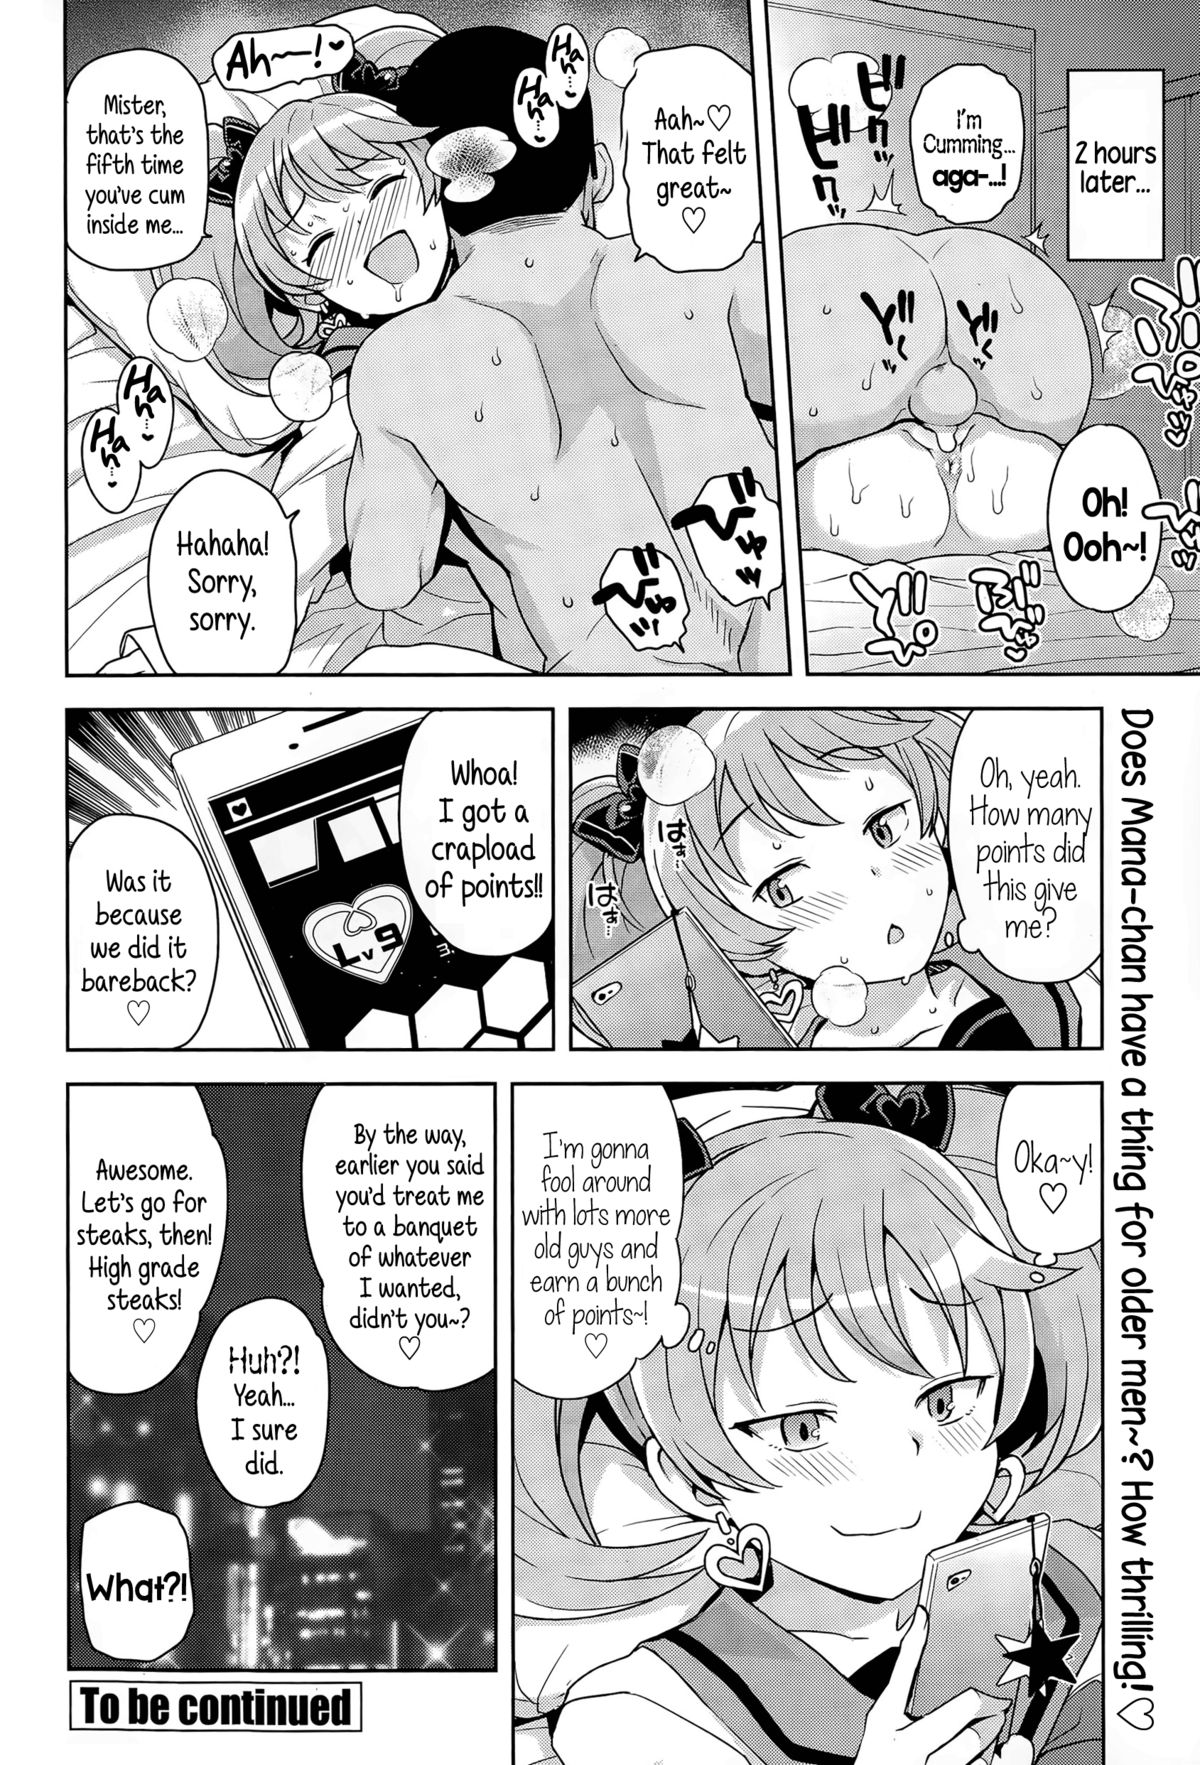 [Tamagoro] Hametomo Collection Ch. 1-2 | FuckBuddy Collection Ch. 1-2 [English] {5 a.m.} page 18 full